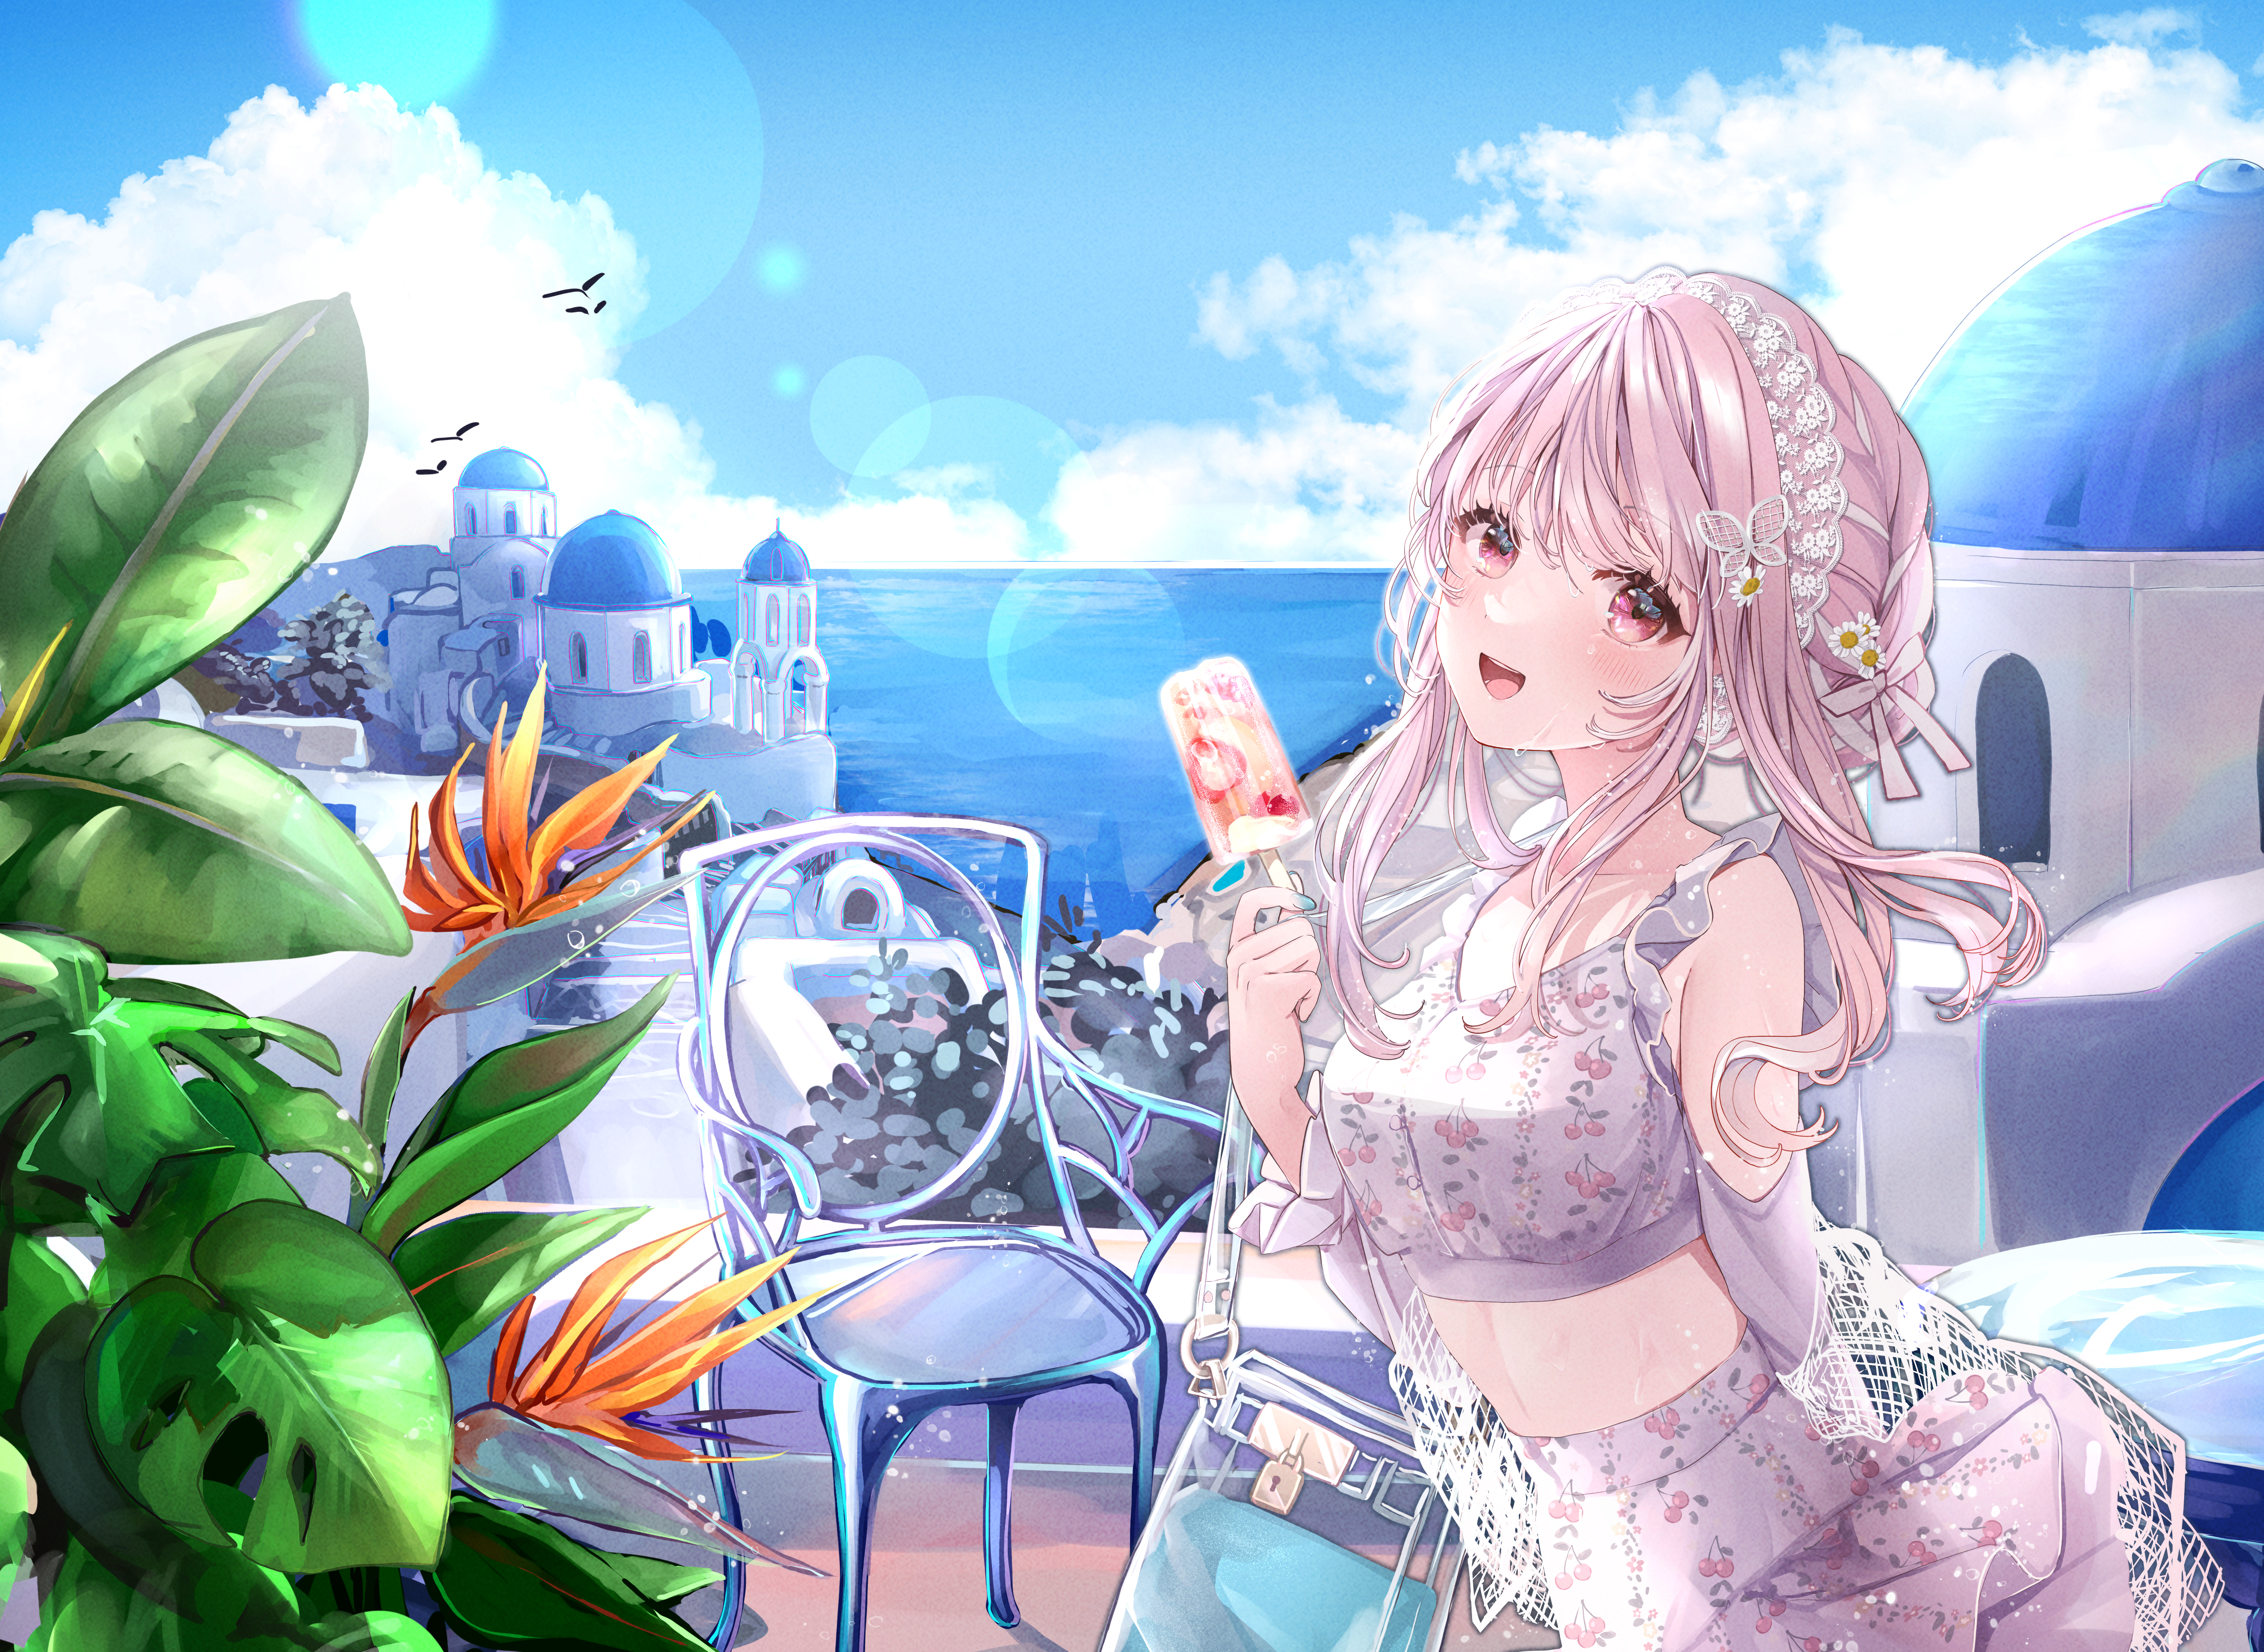 Anime Anime Girls Blushing Popsicle Sky Water Clouds Building Leaves Standing Looking At Viewer Purs 5303x3870